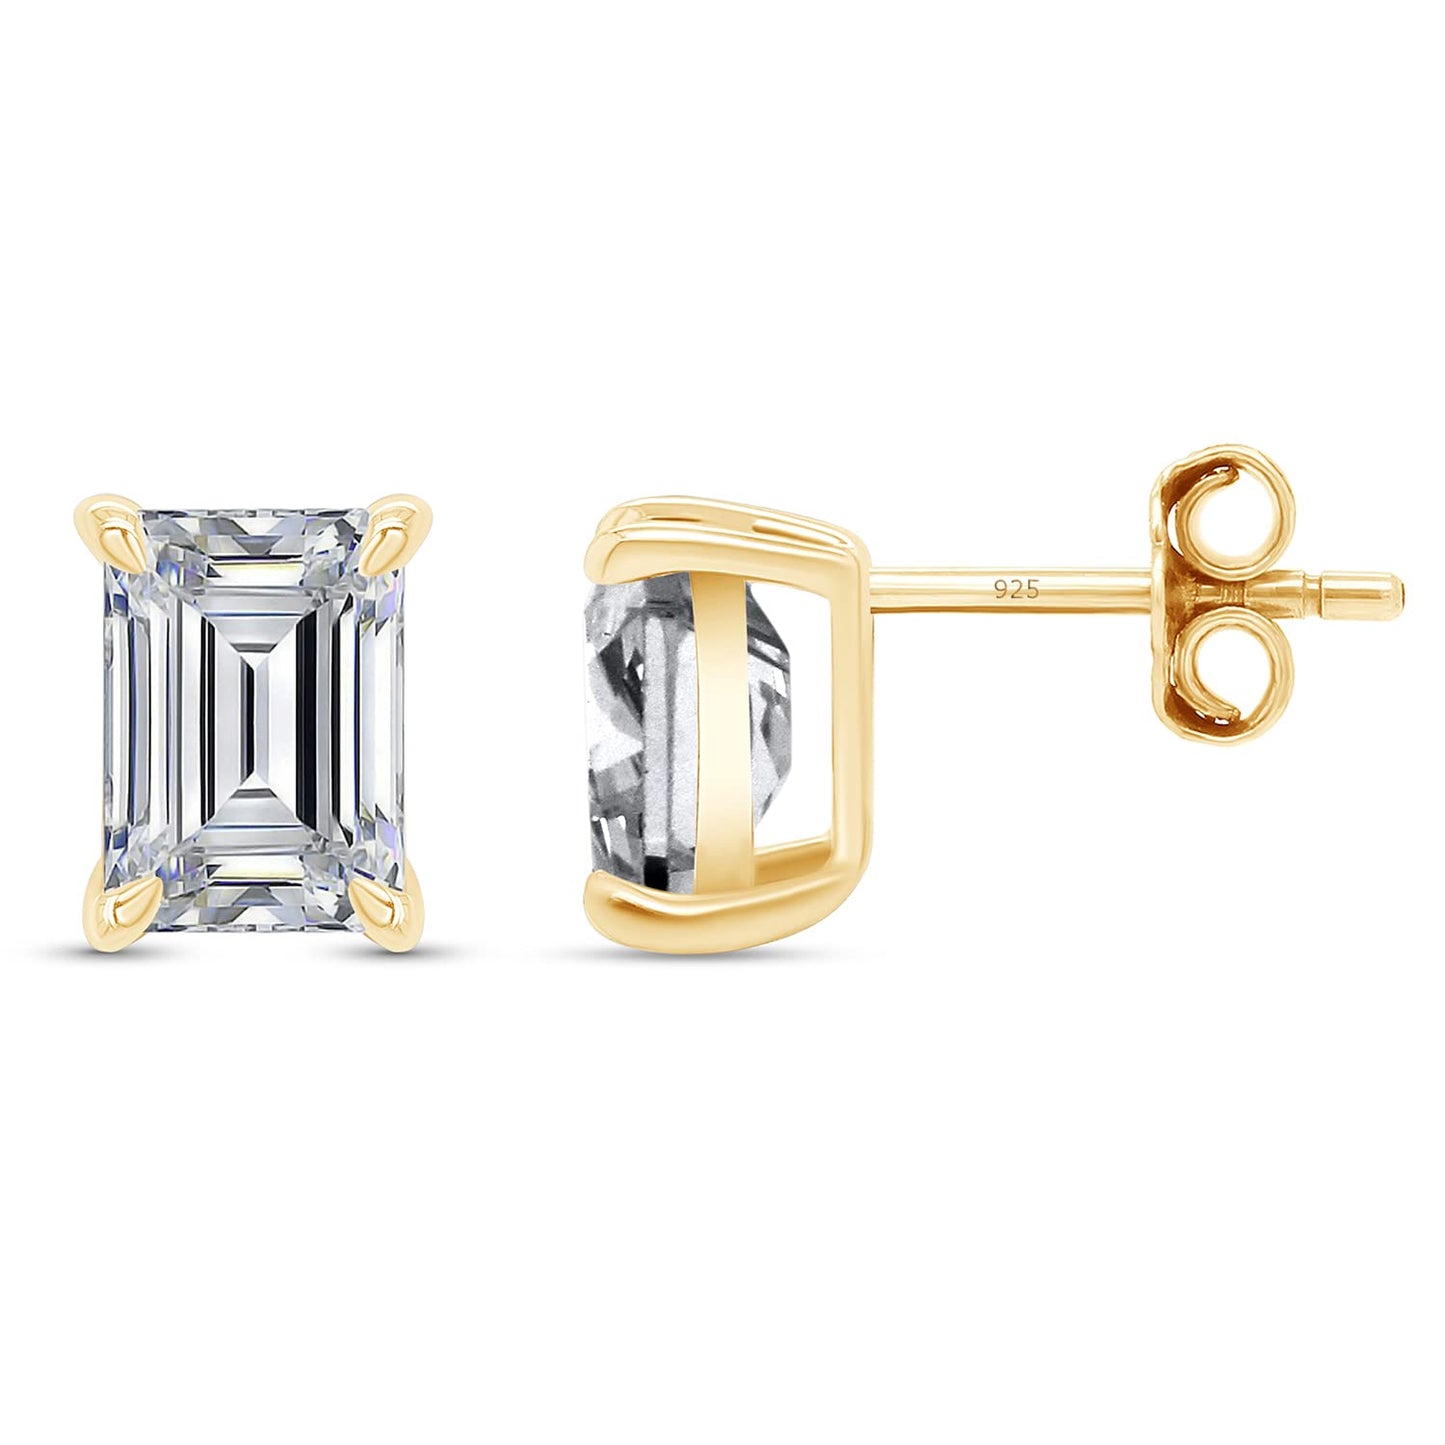 Emerald Cut Lab Created Moissanite Diamond Push Back Solitaire Stud Earrings In 925 Sterling Silver